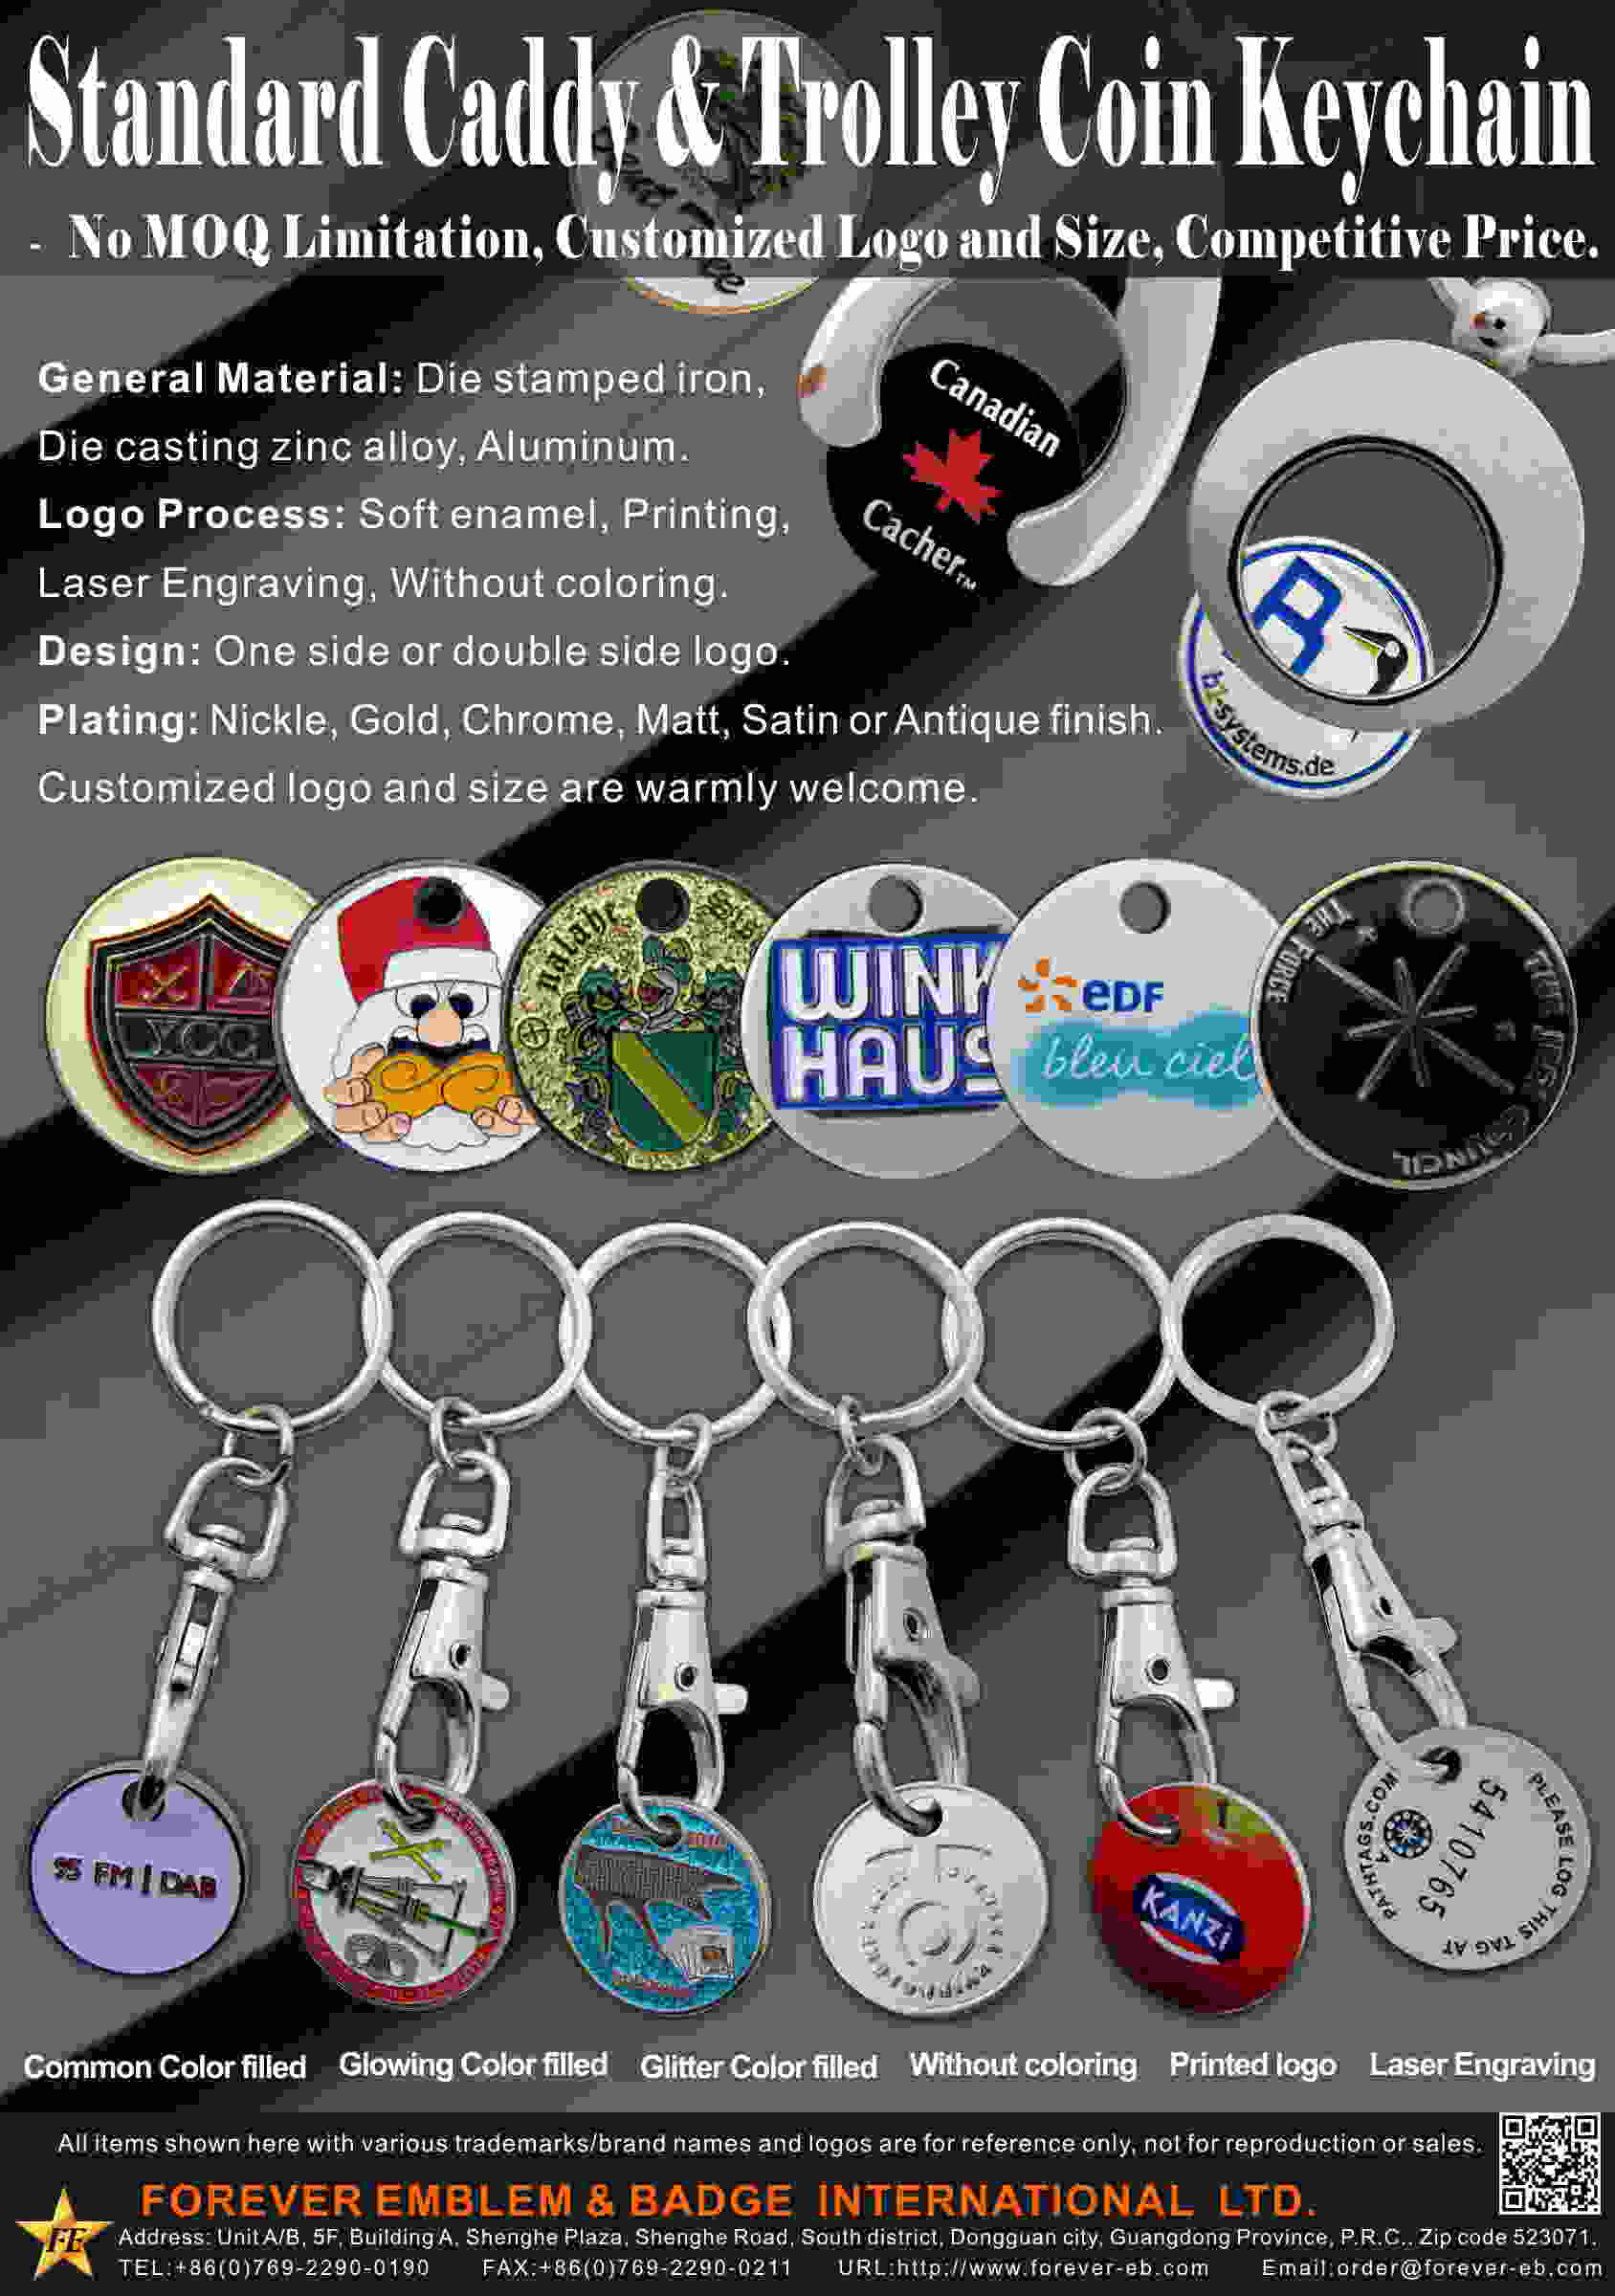 Trolley Coin Keychains